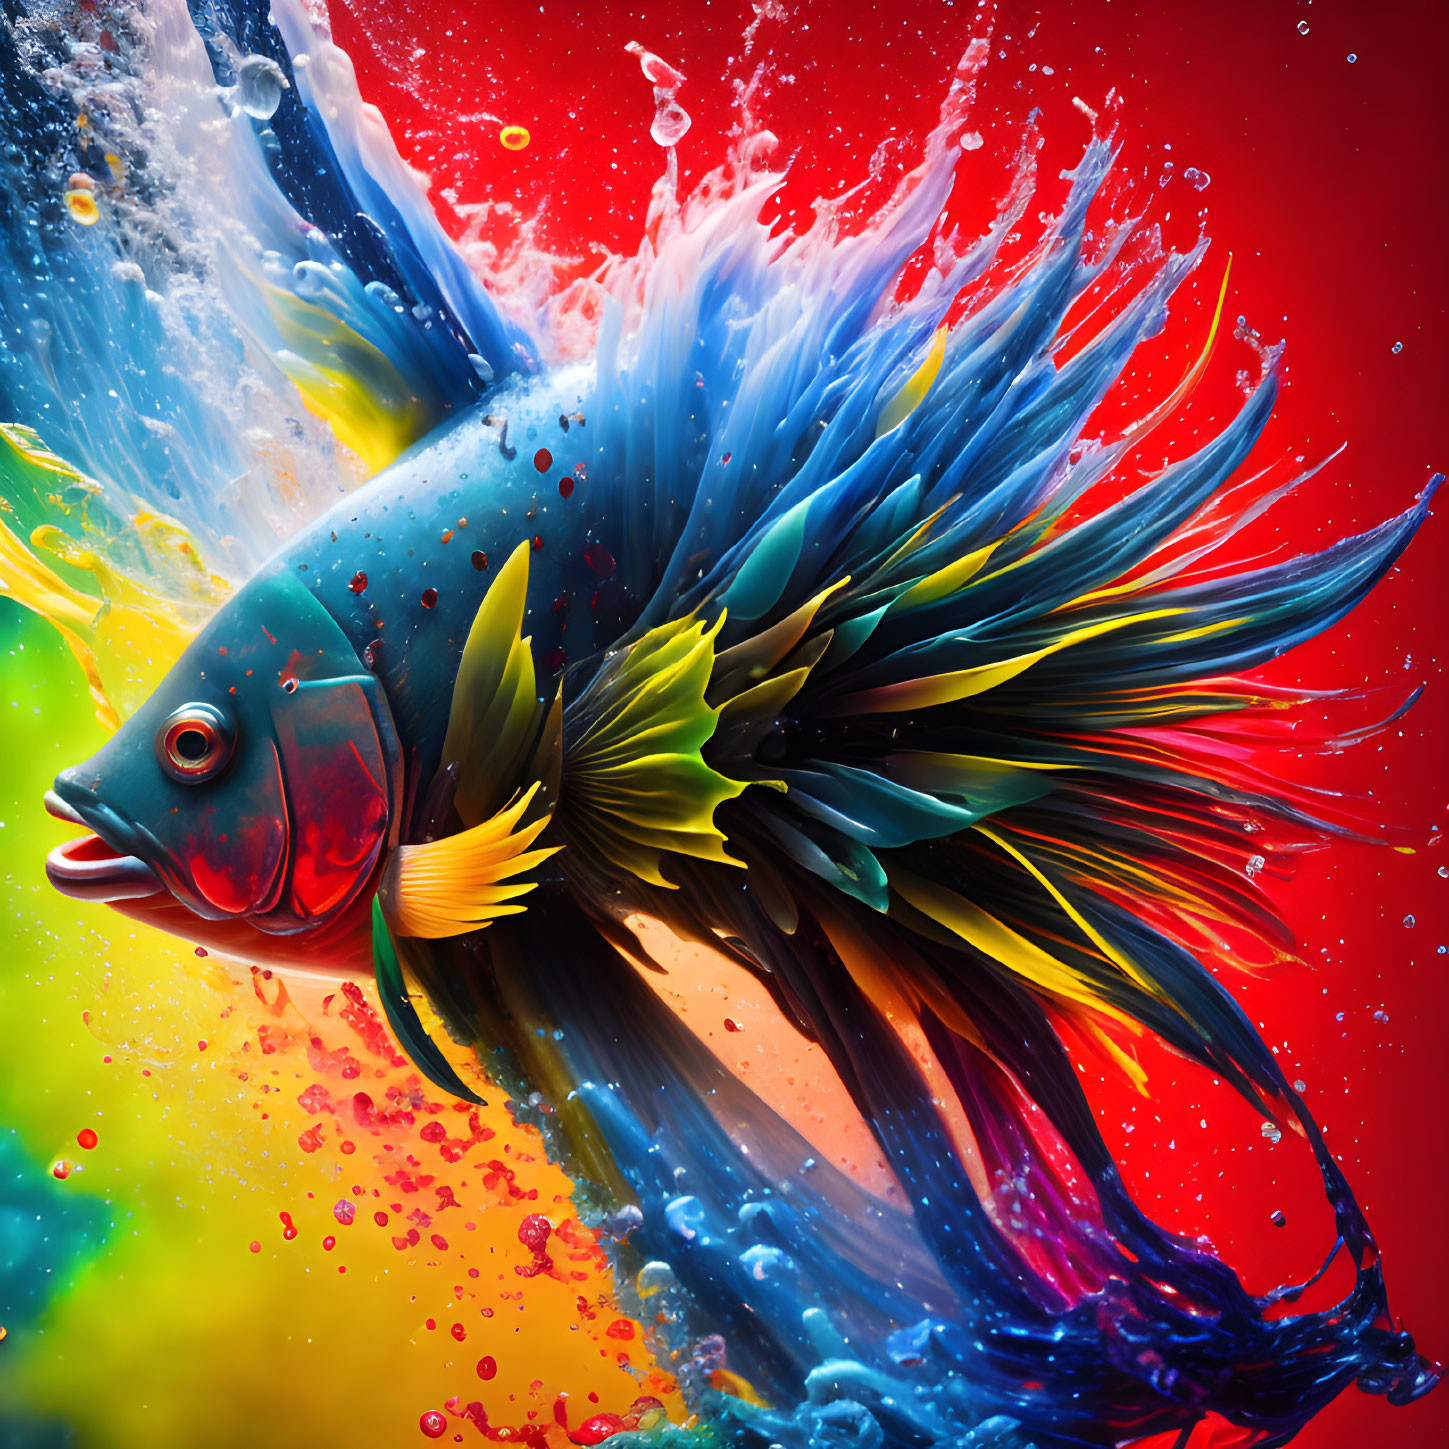 Colorful Betta Fish Artwork with Exaggerated Fins in Multicolored Water